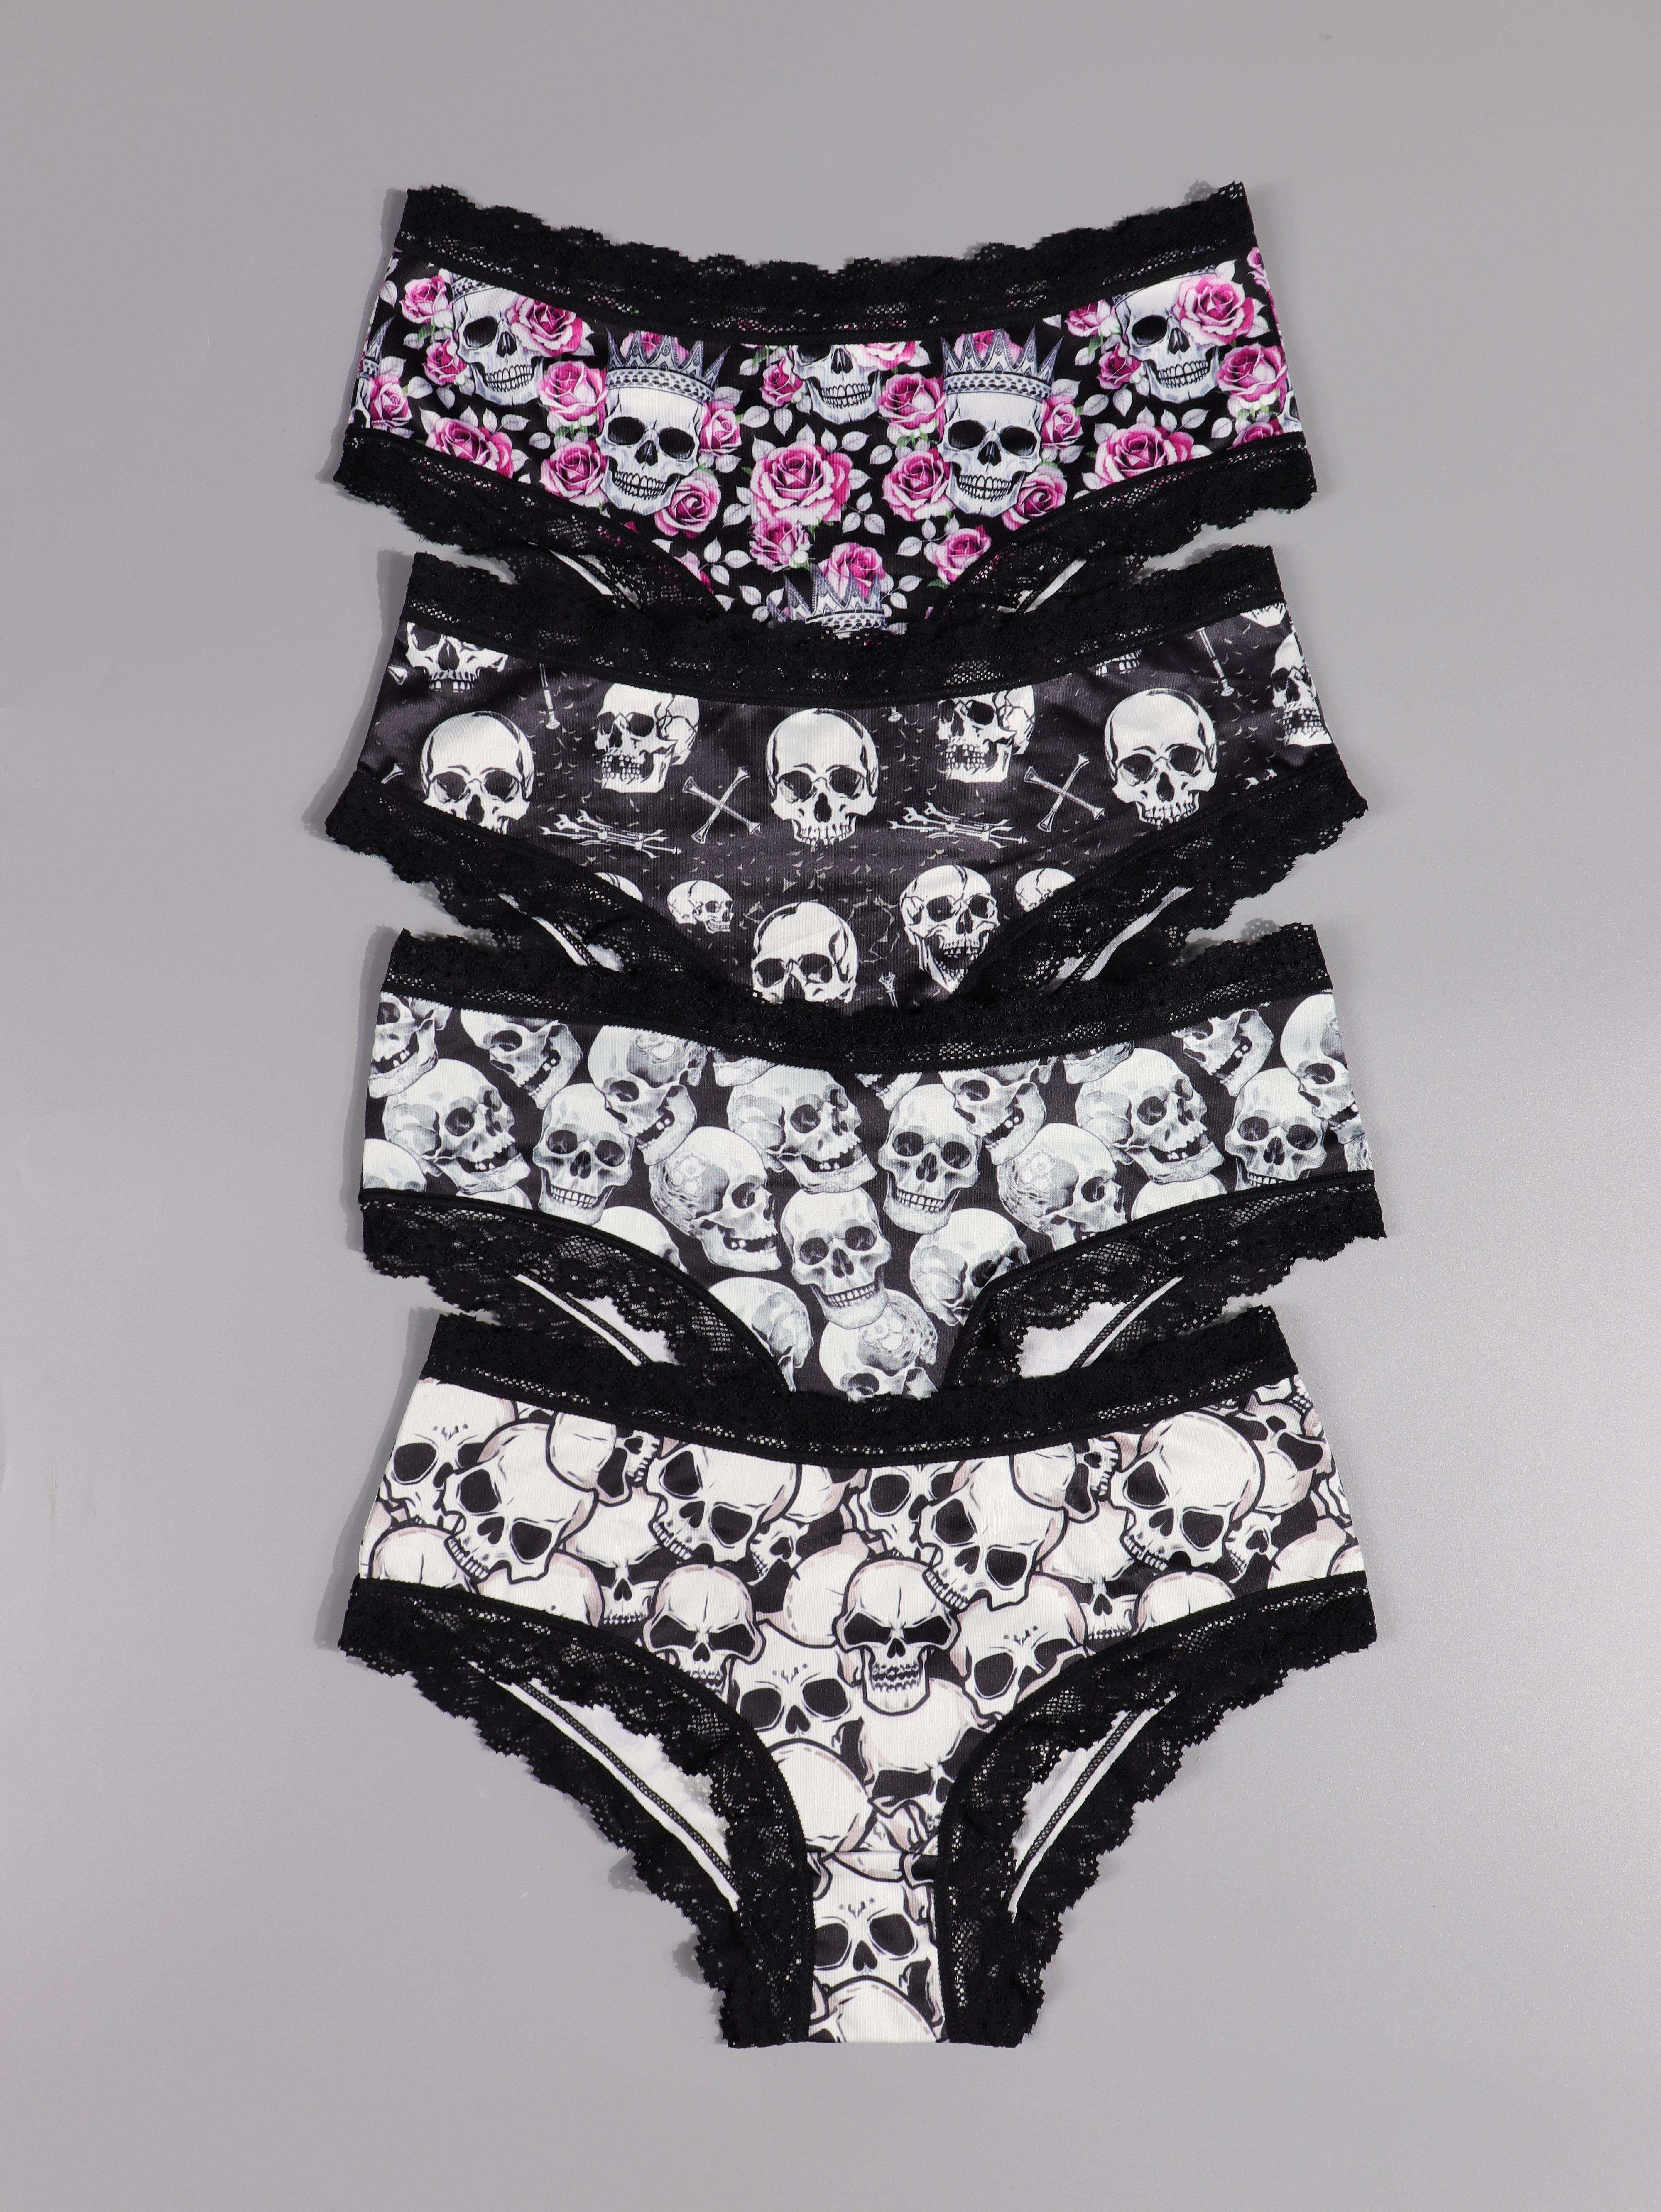 Is That The New Goth Women's Spliced Lace Triangle Panties ??